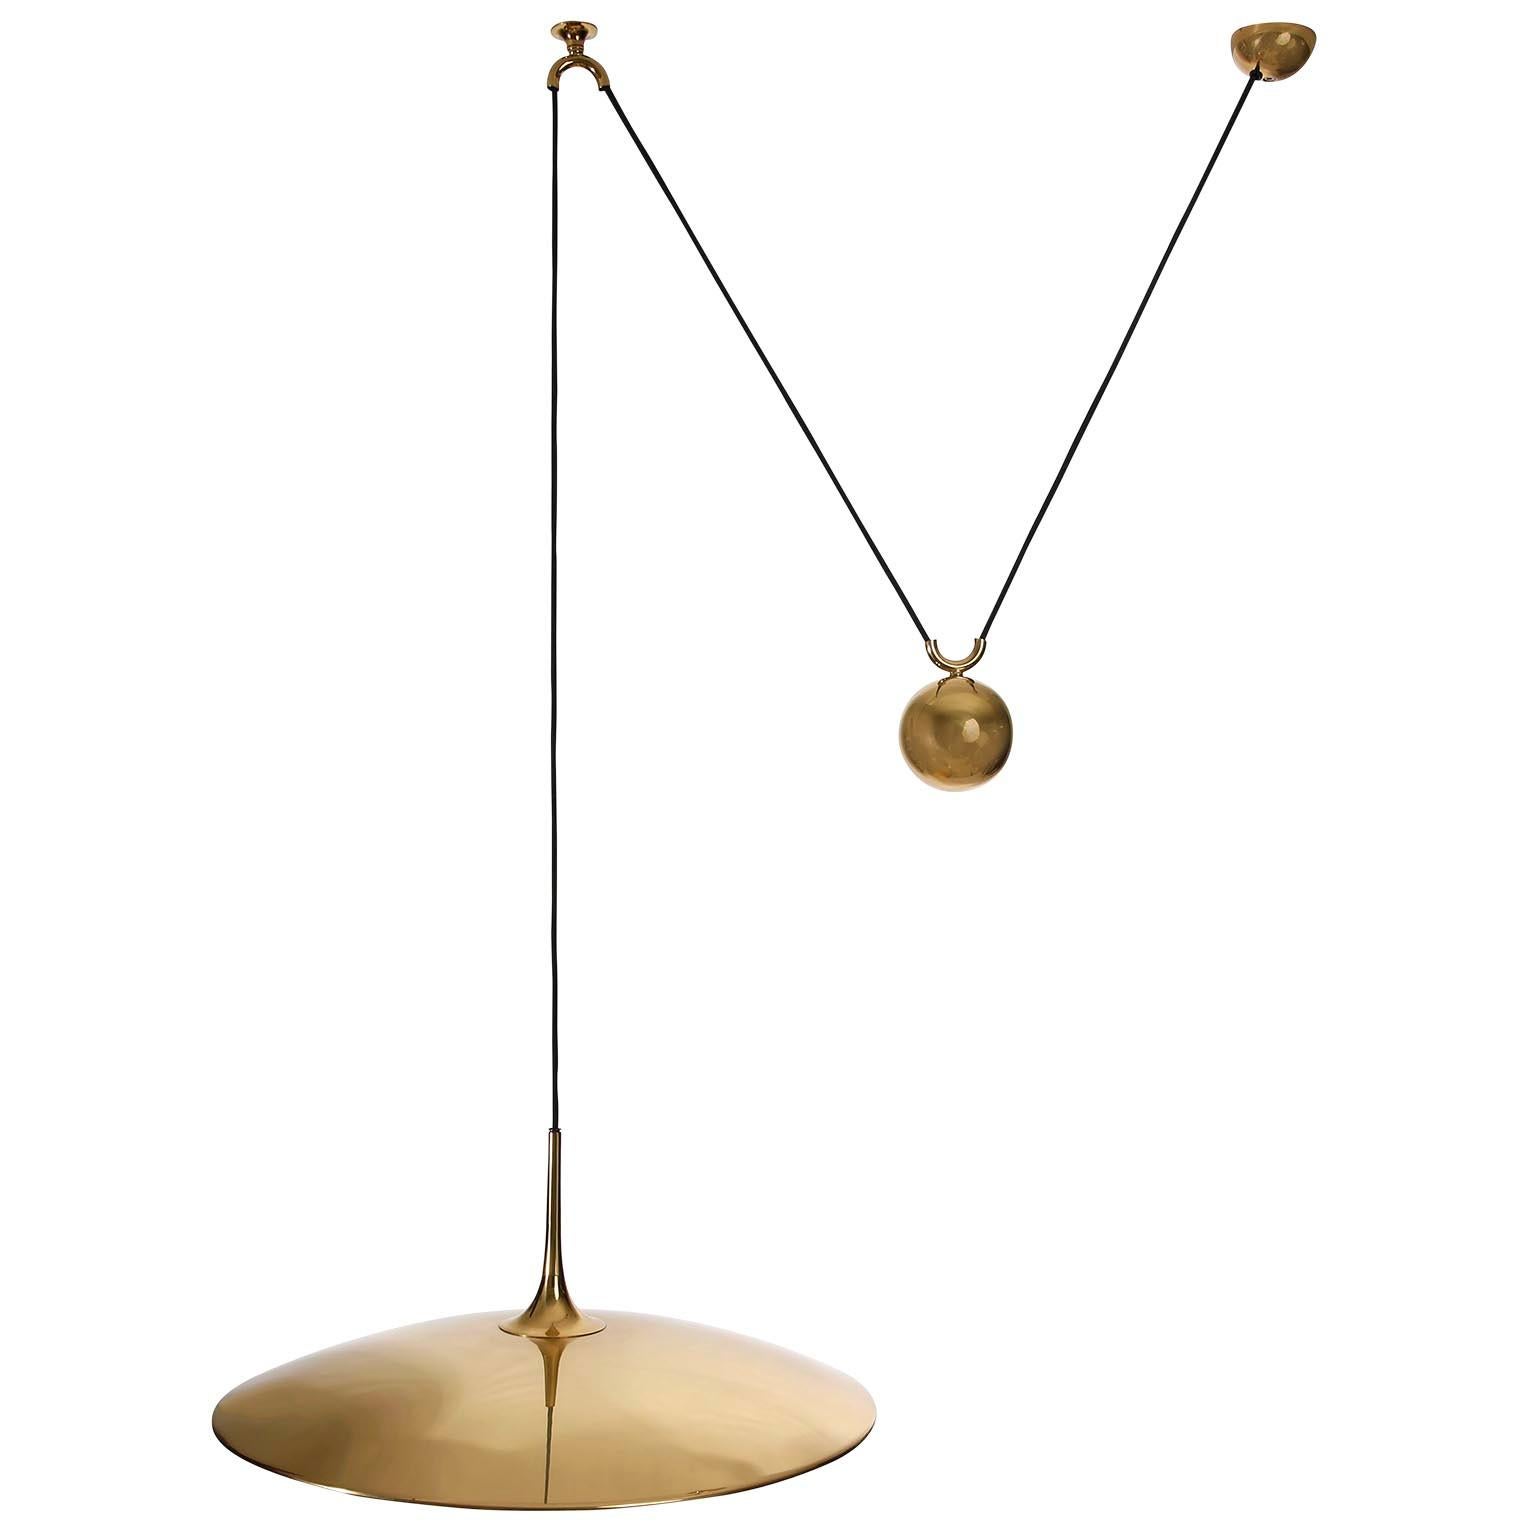 A height adjustable pendant lamp by Florian Schulz, Germany, manufactured in midcentury, circa 1970 (late 1960s-early 1970s).
The fixture is made of solid polished brass which has an aged surface in a rich and warm tone.
The inner side of the lamp